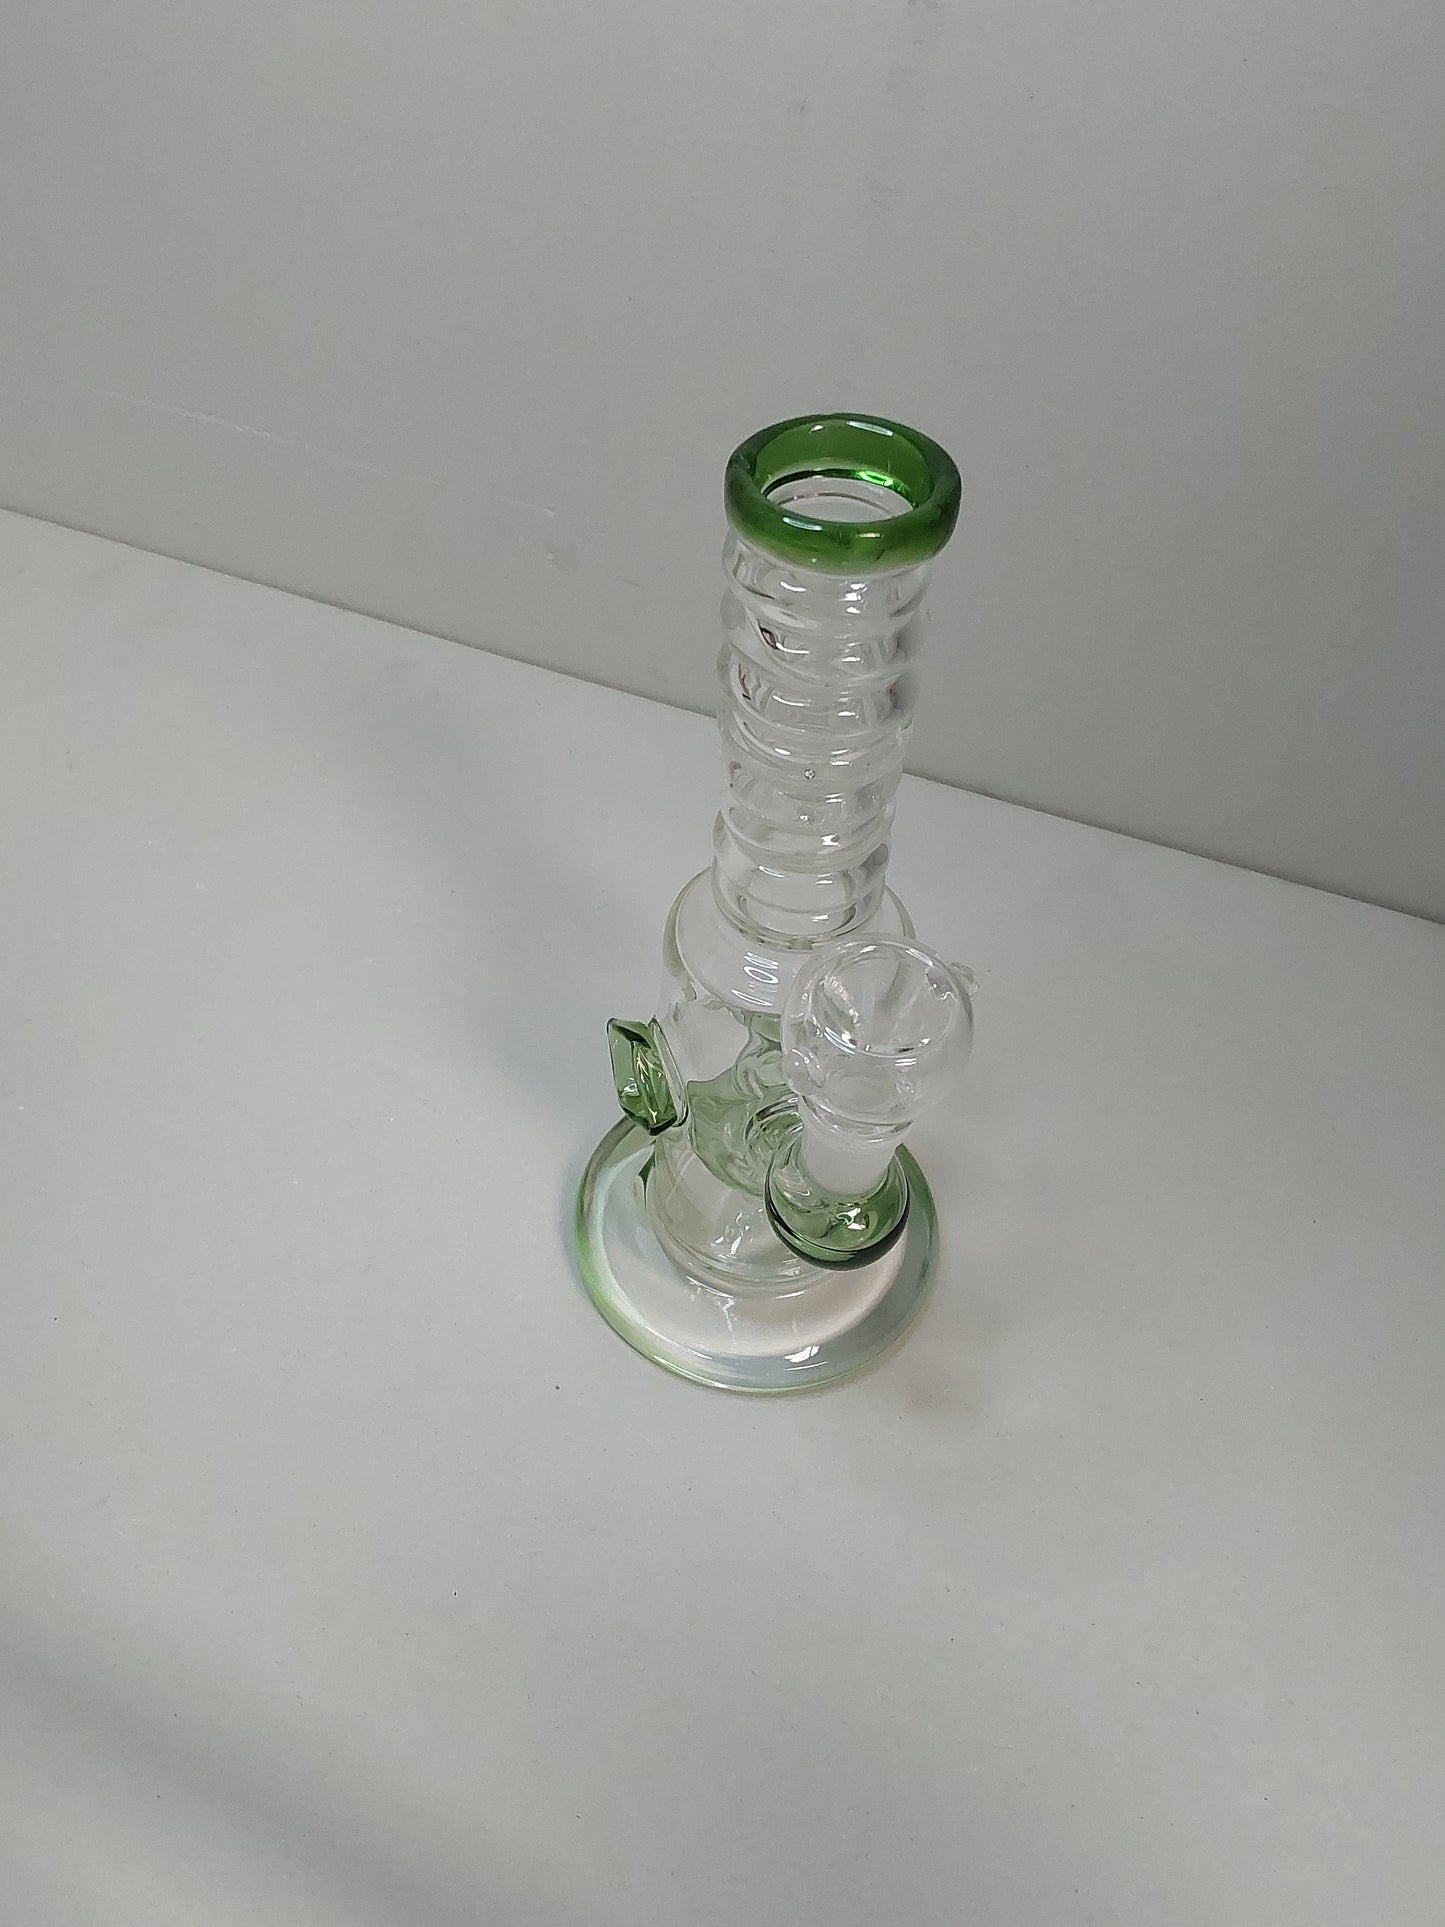 7 in glass bong